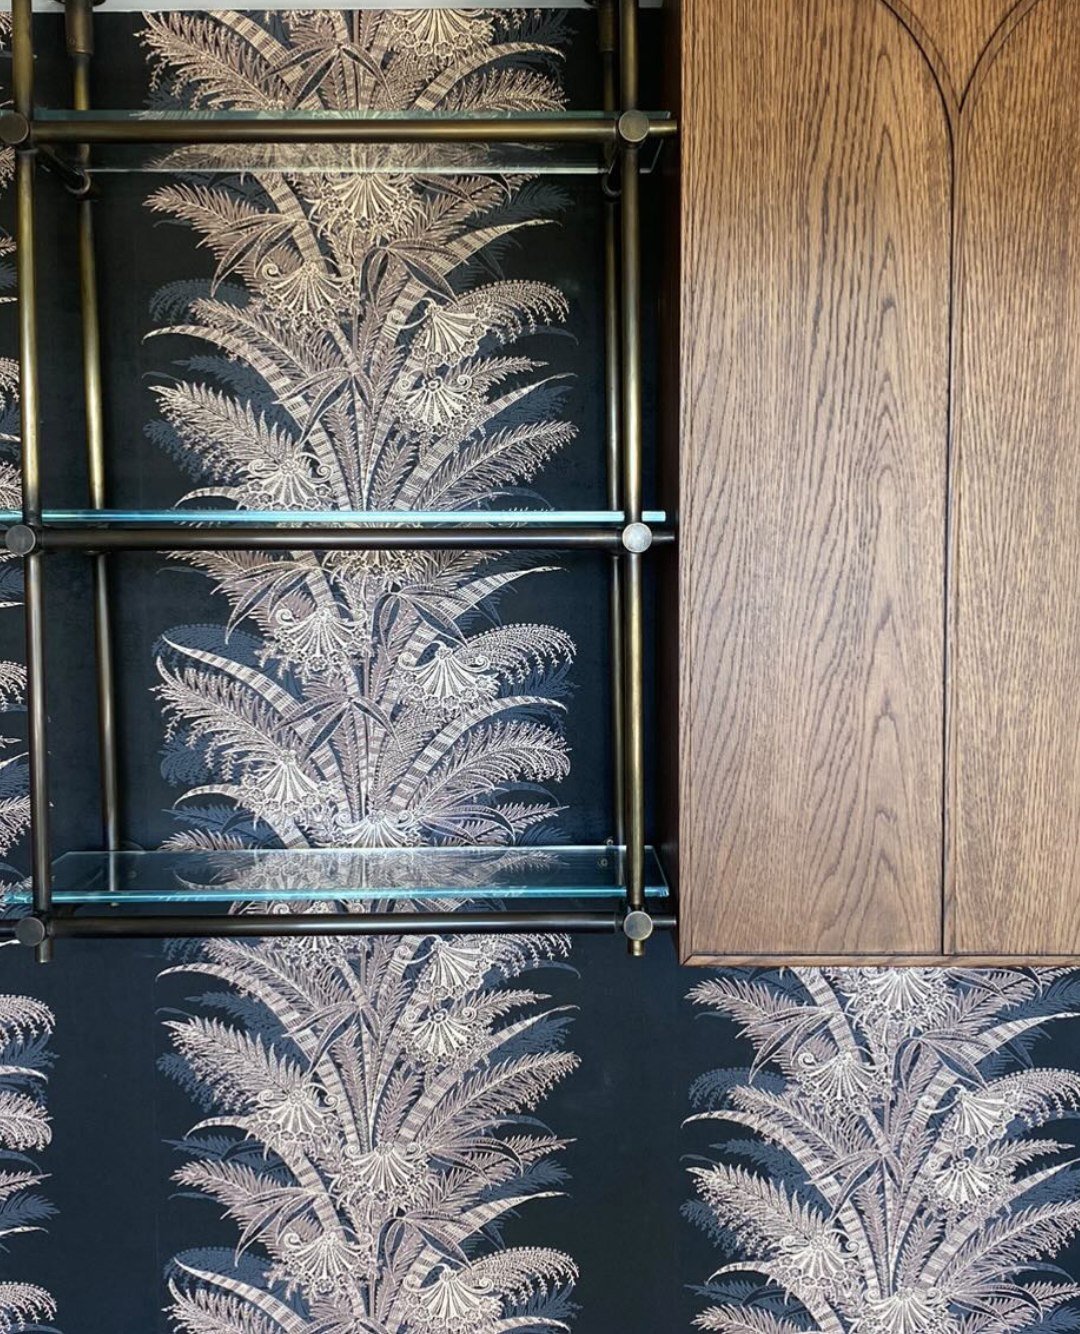 Prepare to be captivated by the allure of our latest design revelation at Home Kangaroo! 💫 ⁠
⁠
Behold the Verdura Amphora wallpaper from the Khr&ocirc;ma by Masureel Collection Cabinet of Curiosities, adorning the bar splashback with unparalleled el